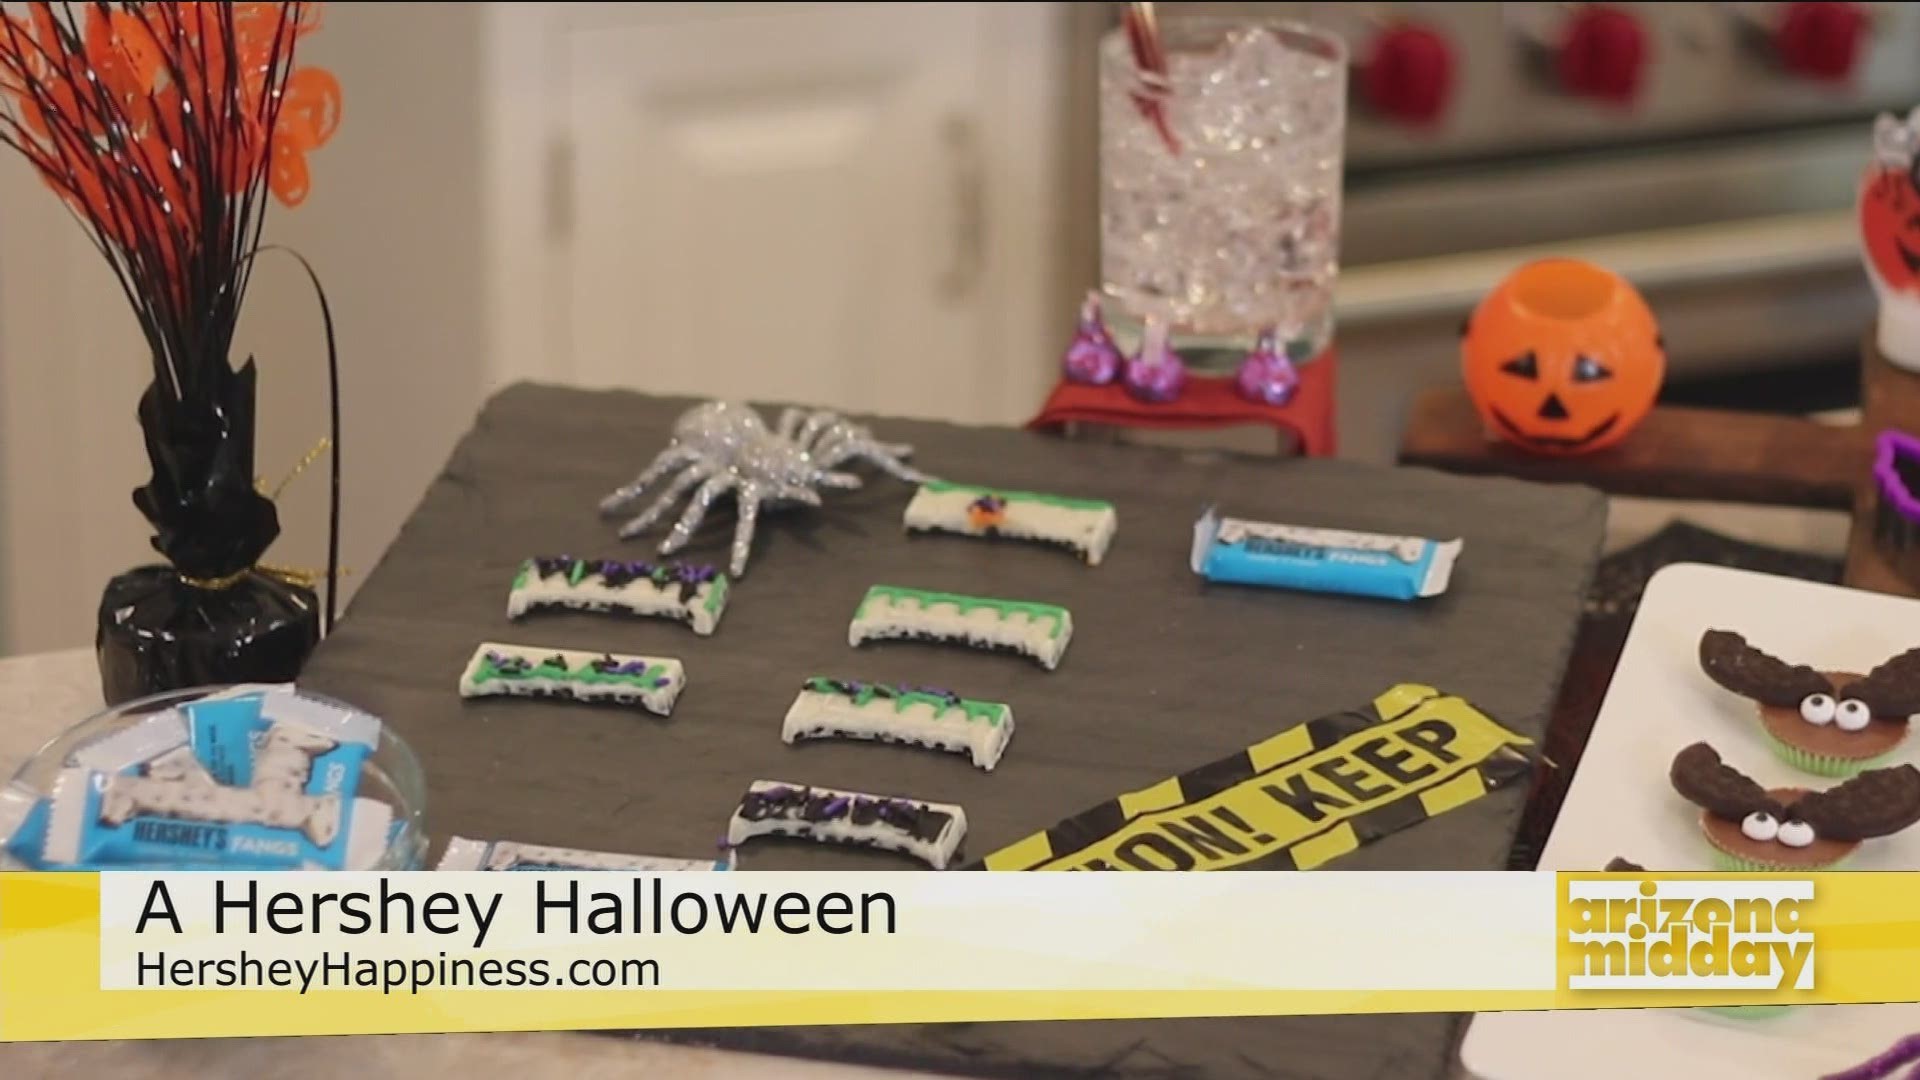 Food and Lifestyle expert Justine Santaniello has teamed up with Hershey's Halloween Squad to bring us some great fun ideas the kids will love.